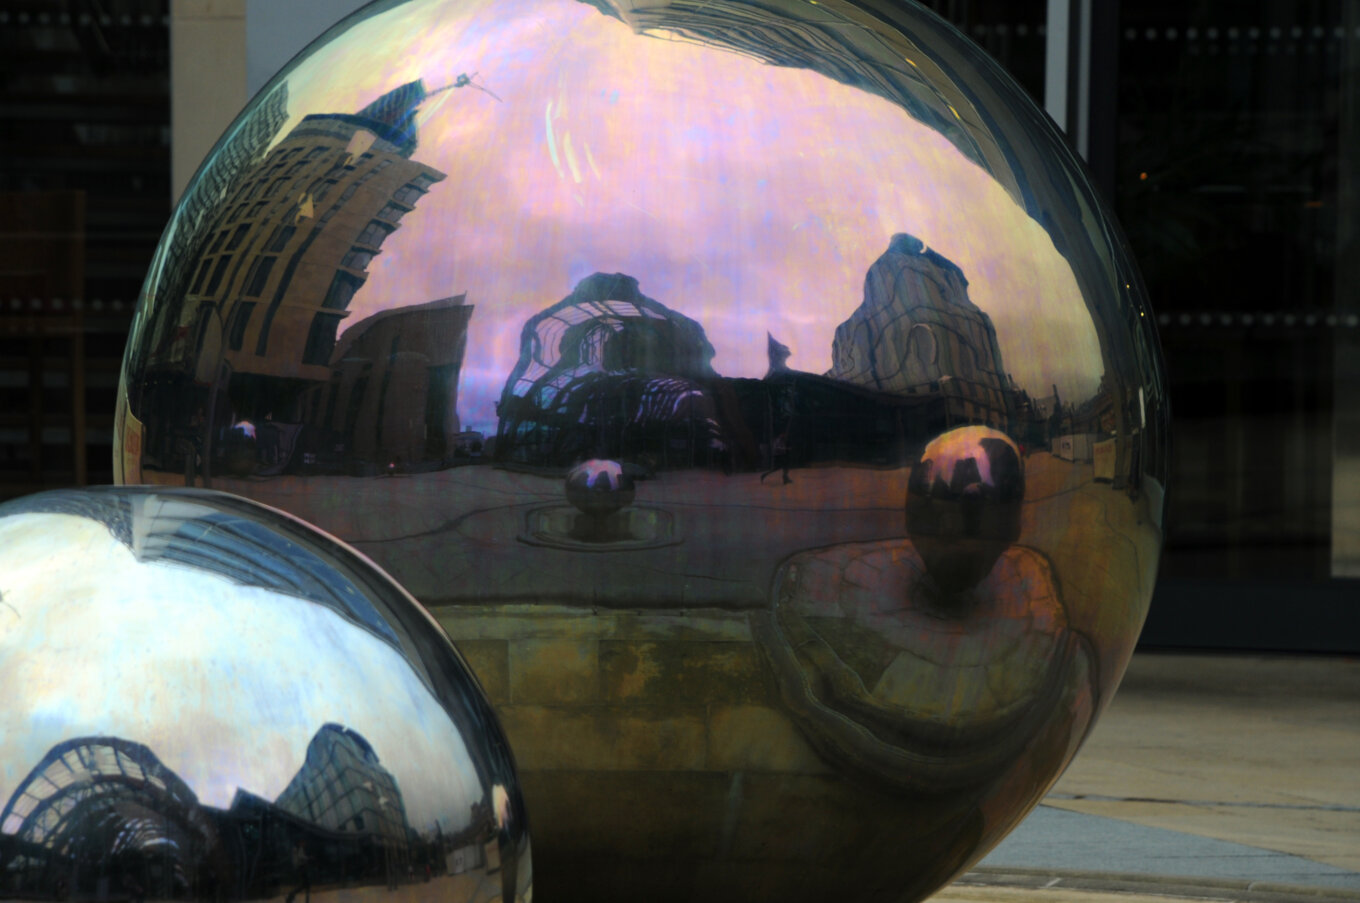 Two giant steel balls with the reflection of the Winter Garden and other buildings.